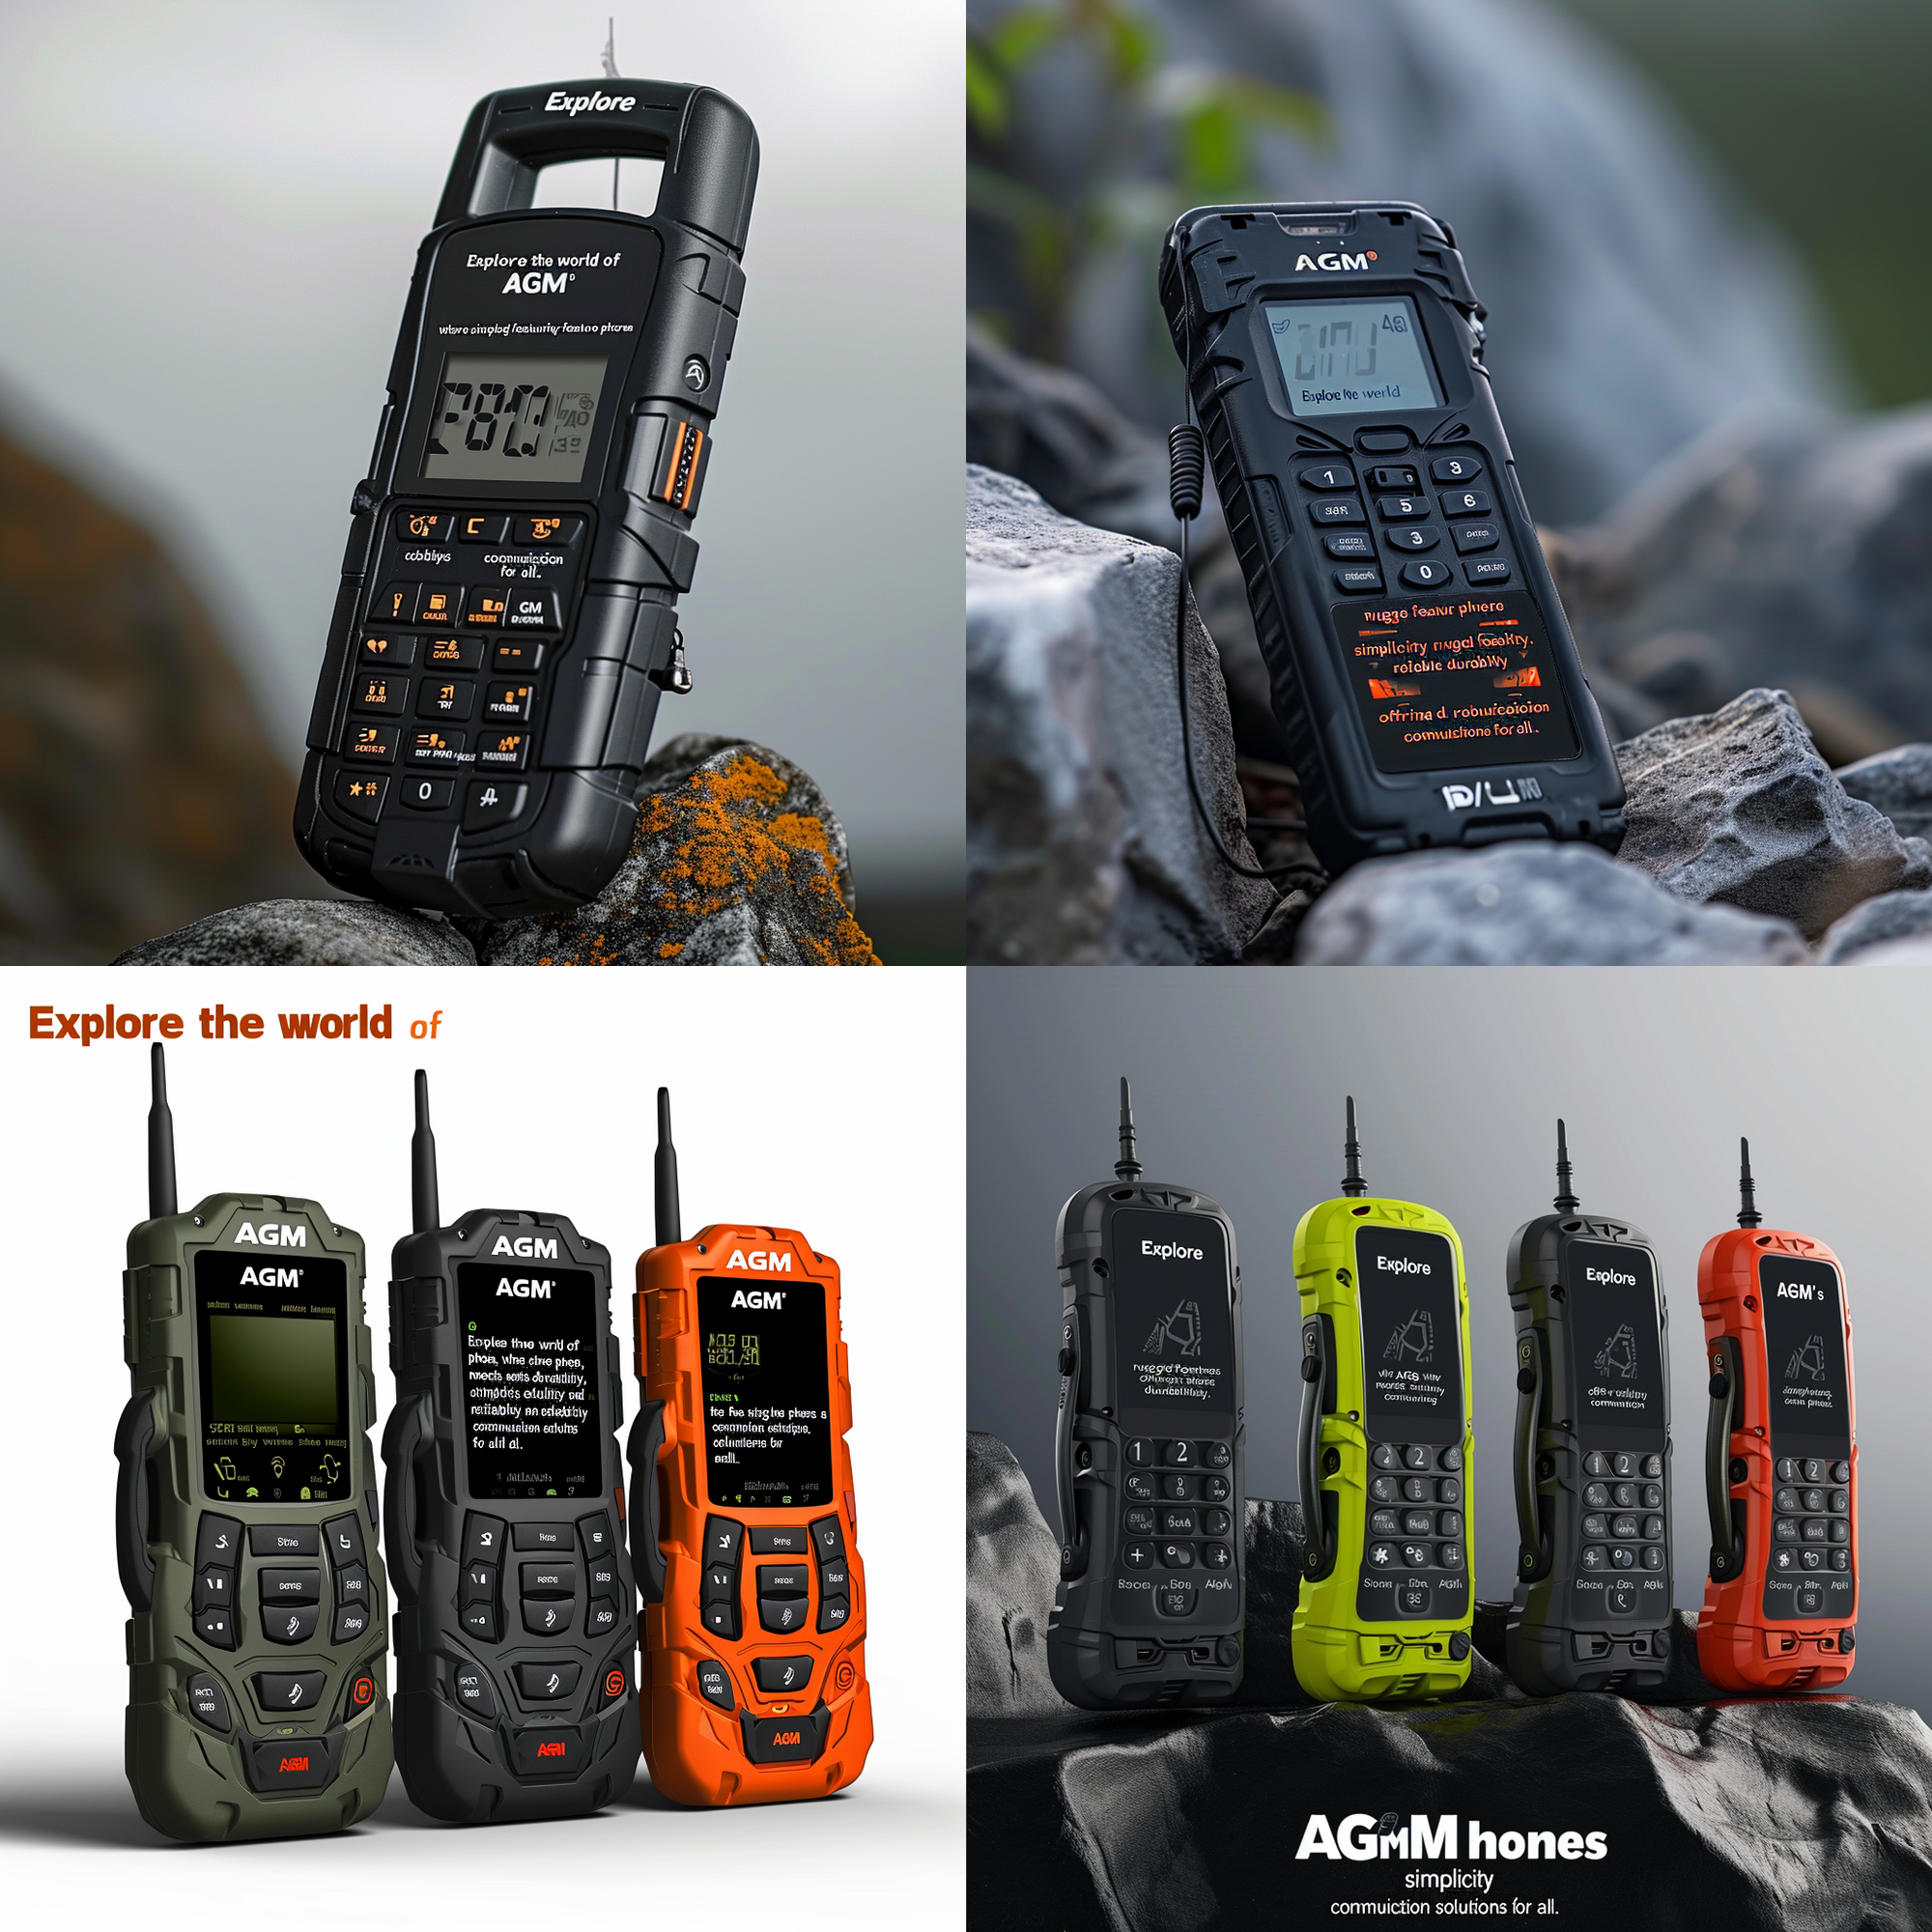 AGM's Rugged Feature Phones: Combining Simplicity with Unmatched Durability